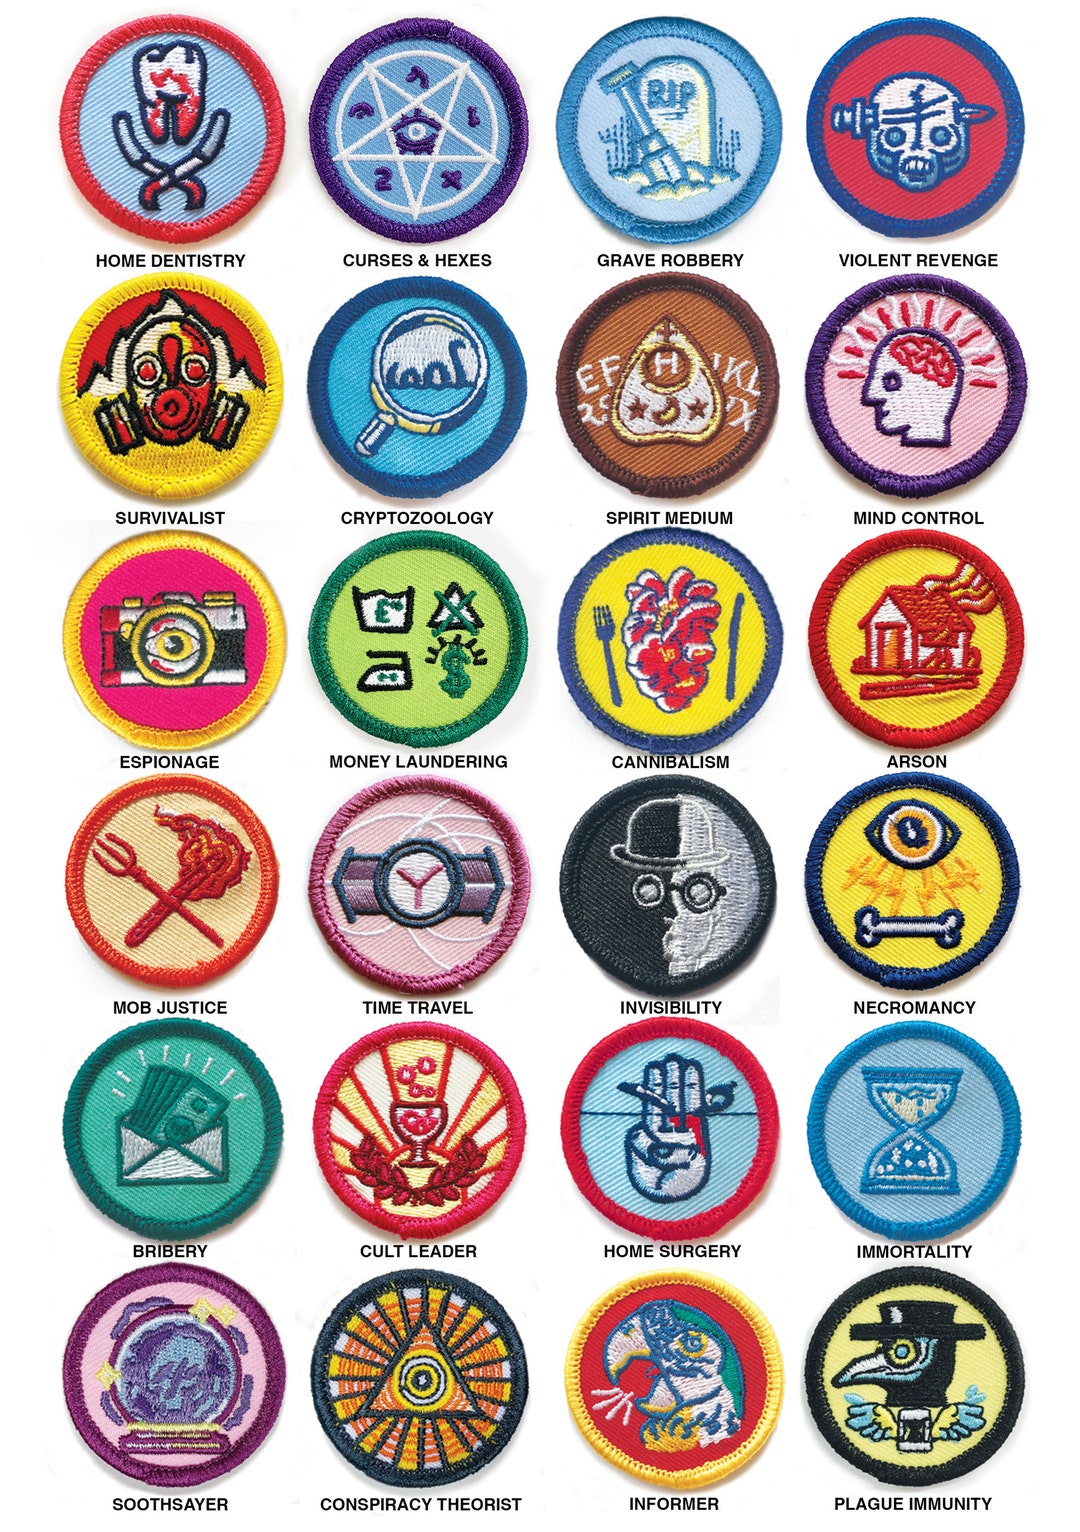 Back to School Products With Badges Plus